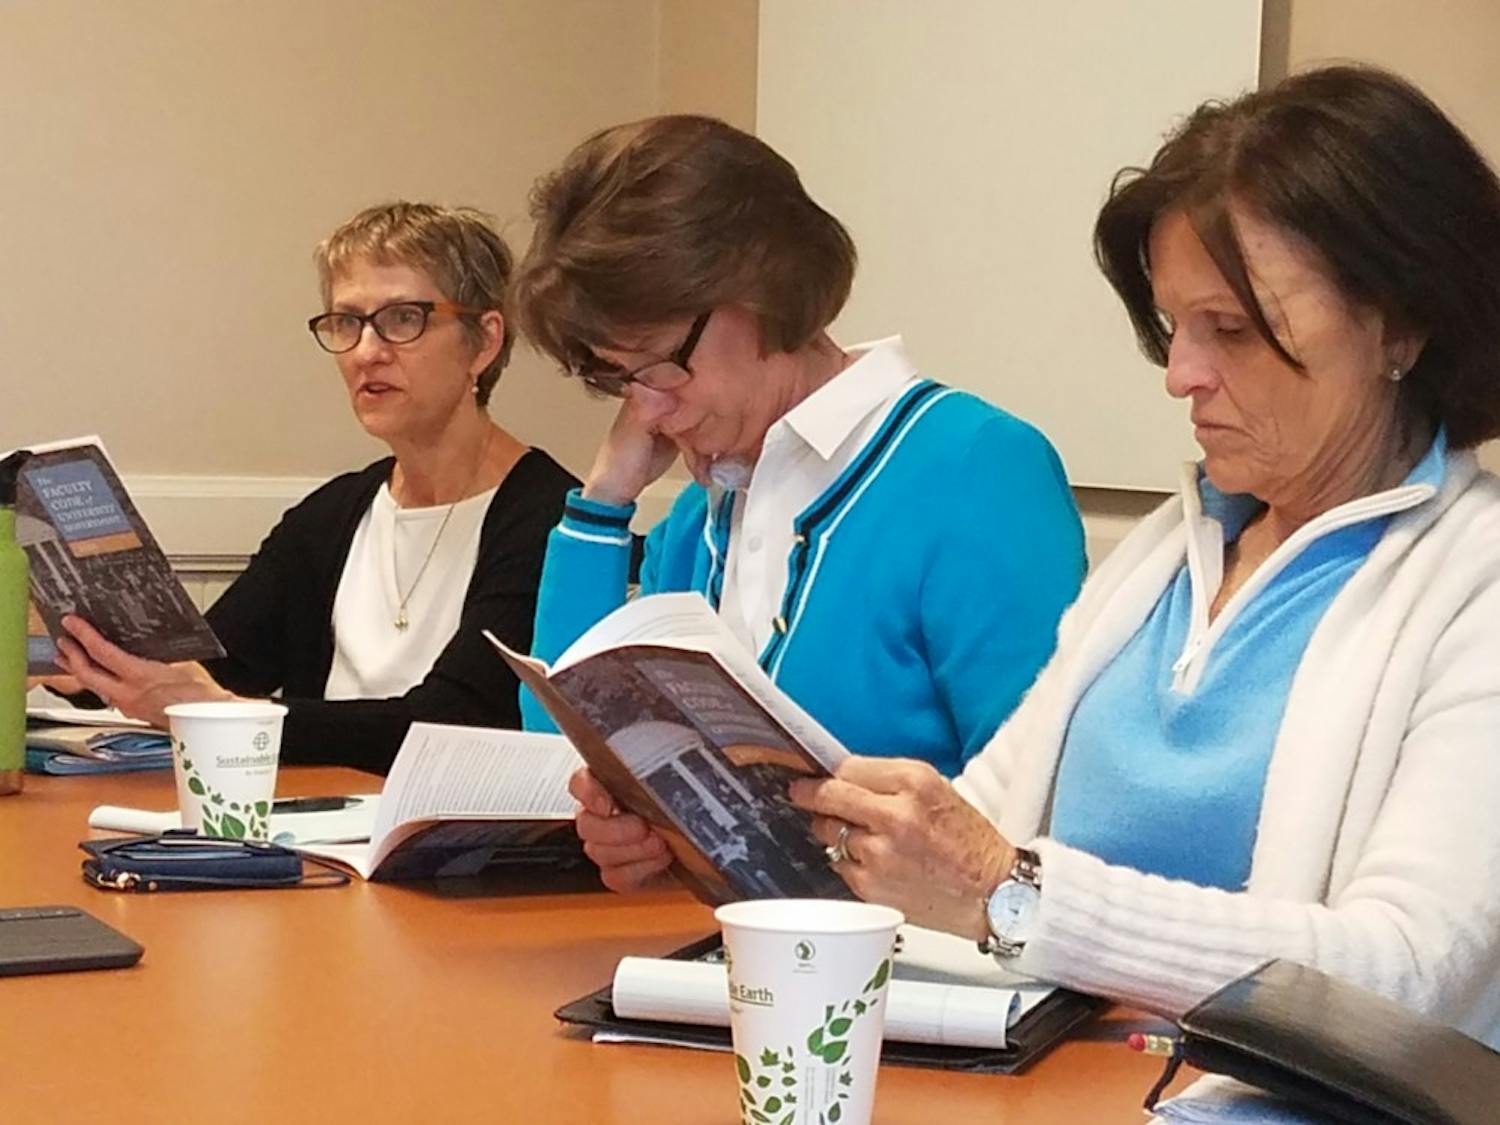 University Government Committee members (from left to right) Anne Klinefelter, Joy Renner and Suzanne Gulledge review the wording in the Faculty Code. The University Government Committee met on Wednesday to discuss any possible changes to the Code. 
